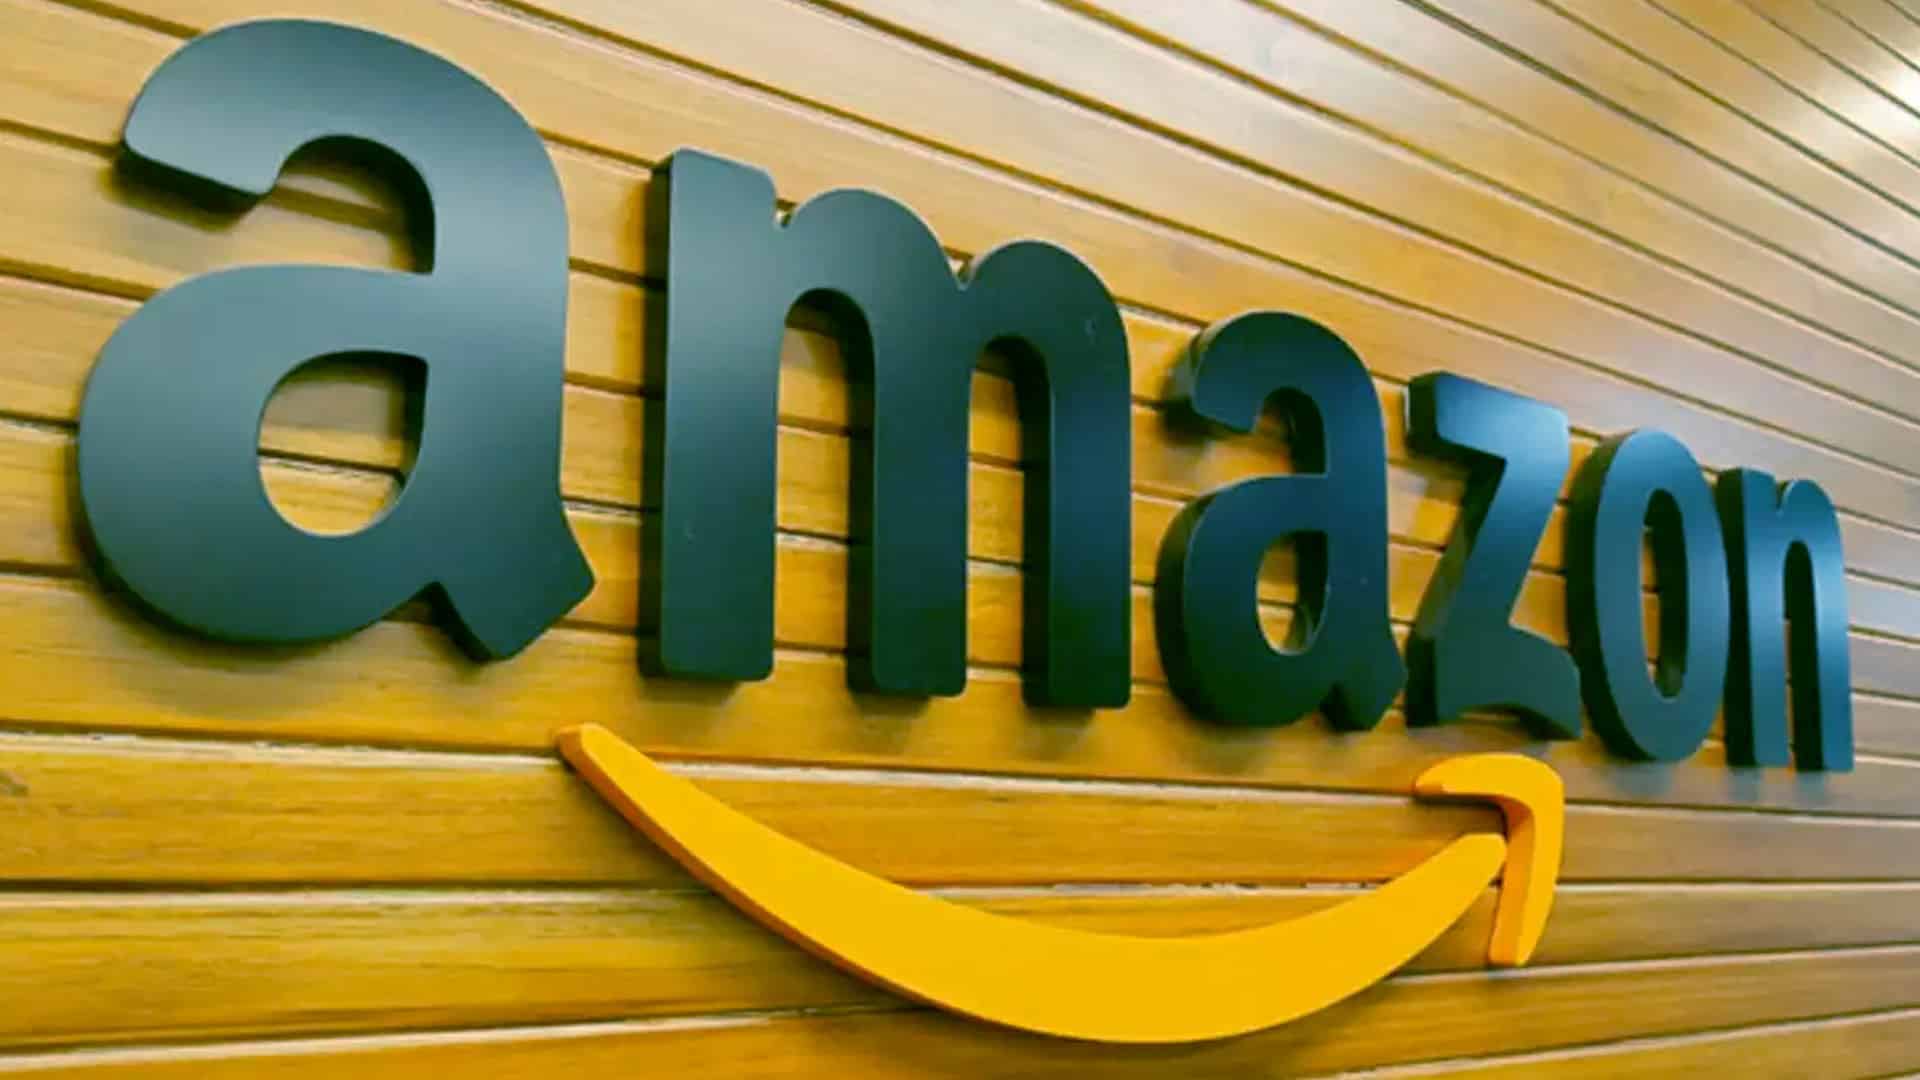 More customers shopped on Amazon.in, 79% new users from small towns